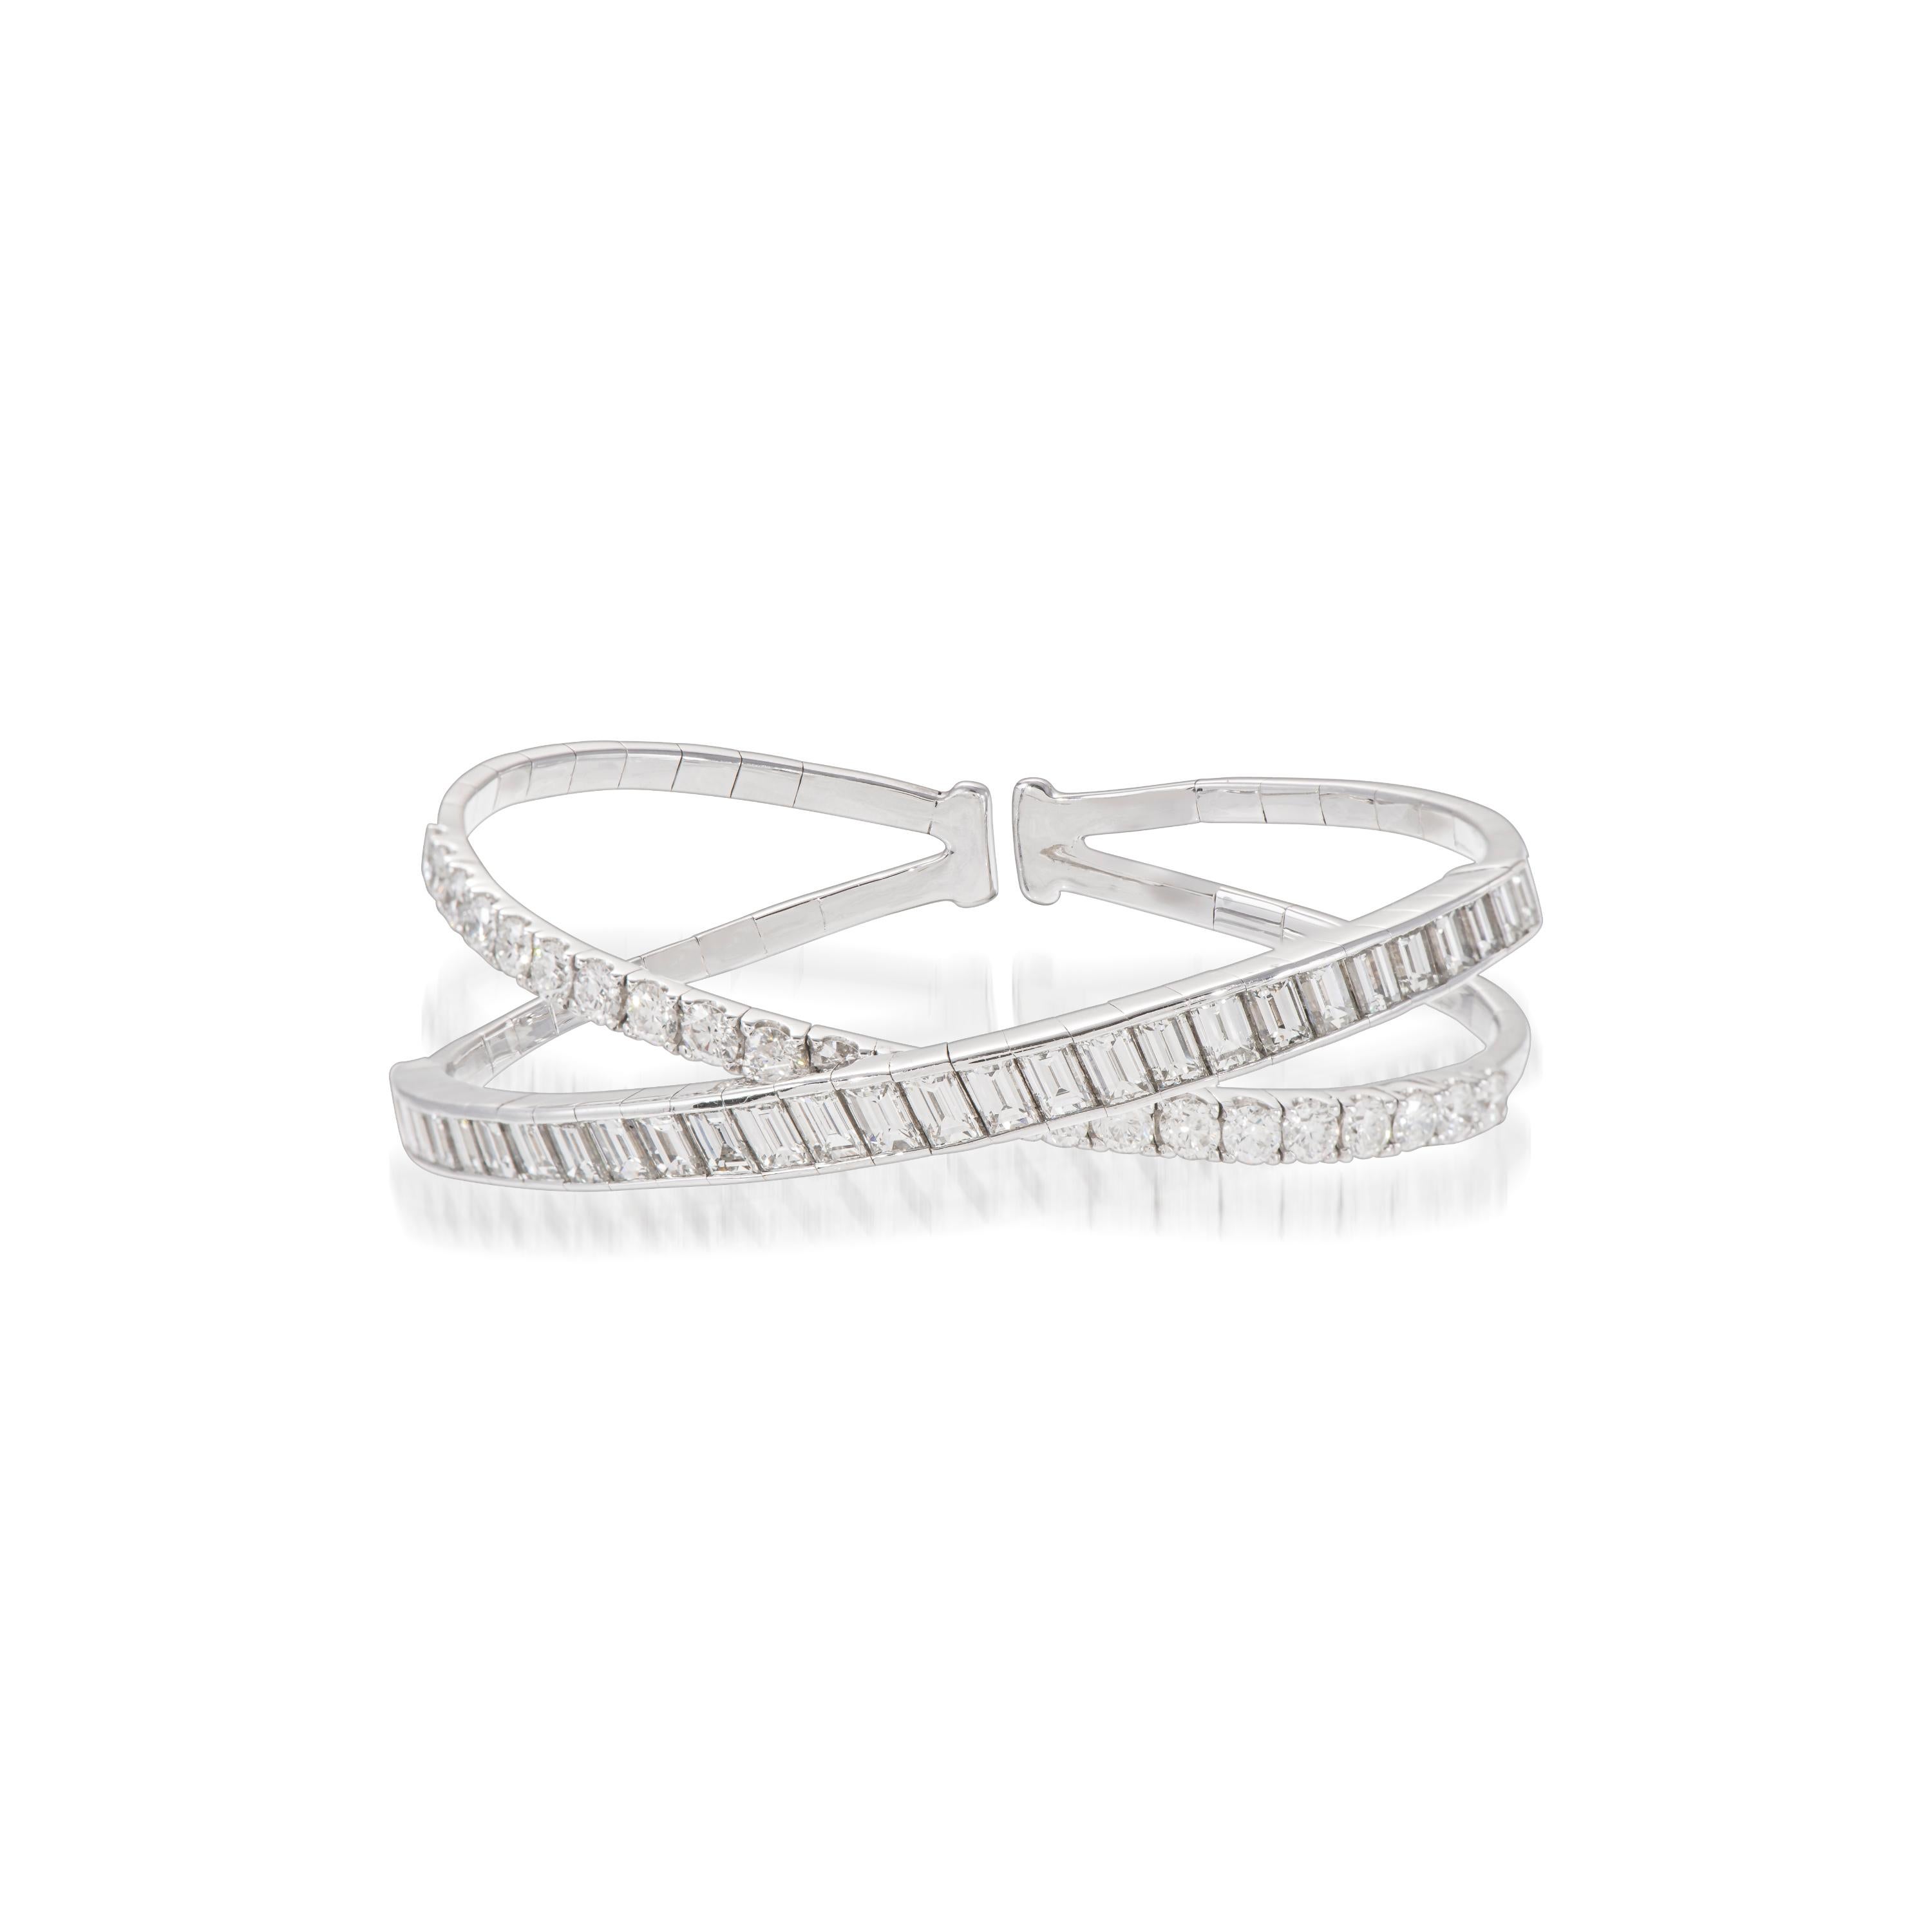 This cuff bangle bracelet is crafted in 18K white gold and encrusted with one band of sparkling baguette diamonds and one band of brilliant round diamonds totaling 9.09 carats. The clean and modern criss-cross design creates intentional space so